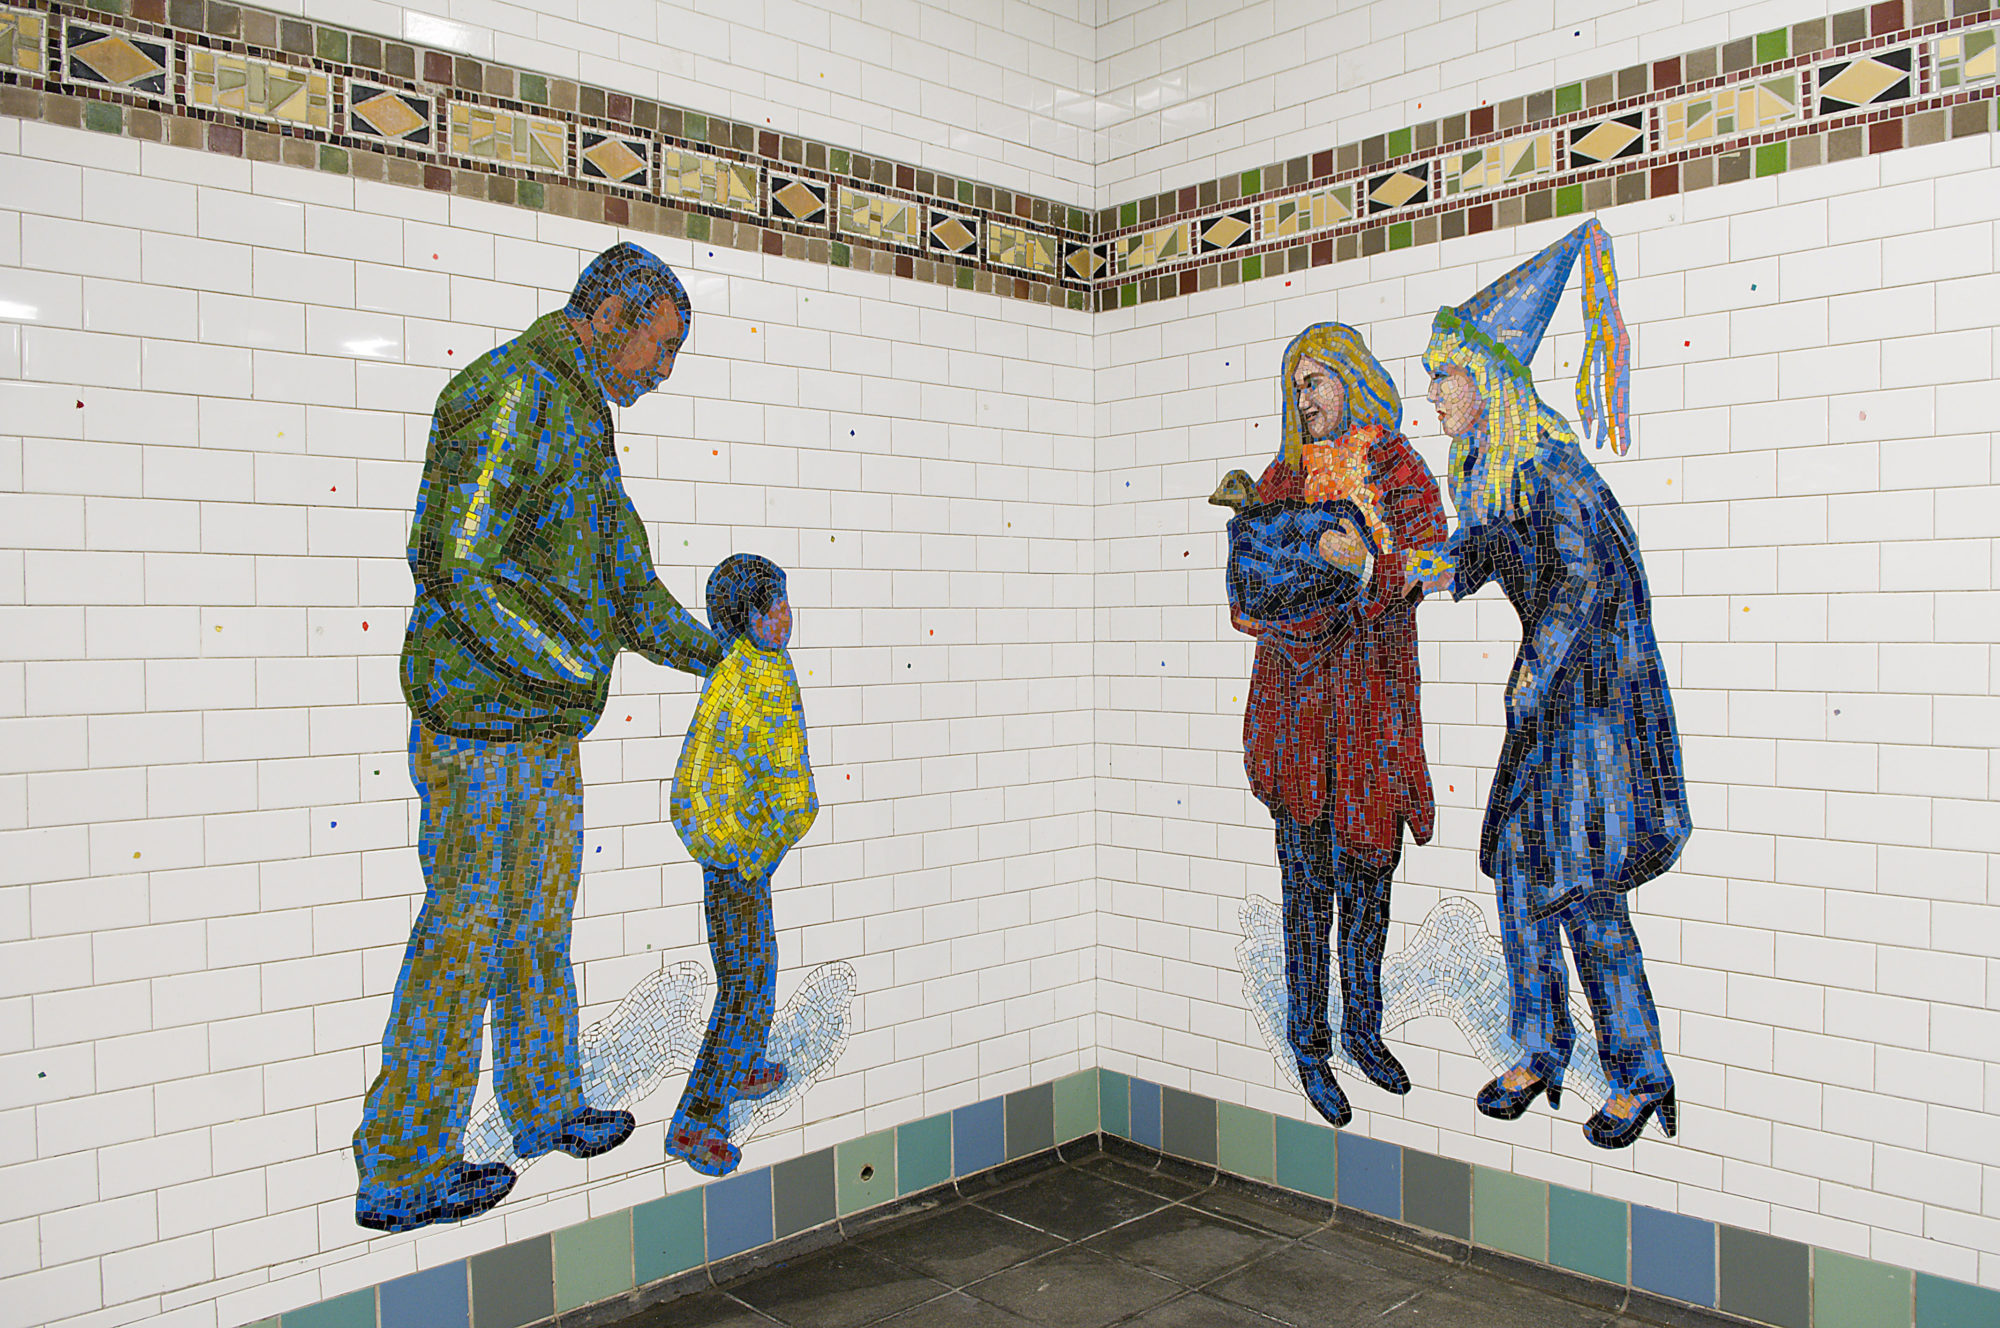 A mosaic at the corner of a subway station of three adults tending to a child